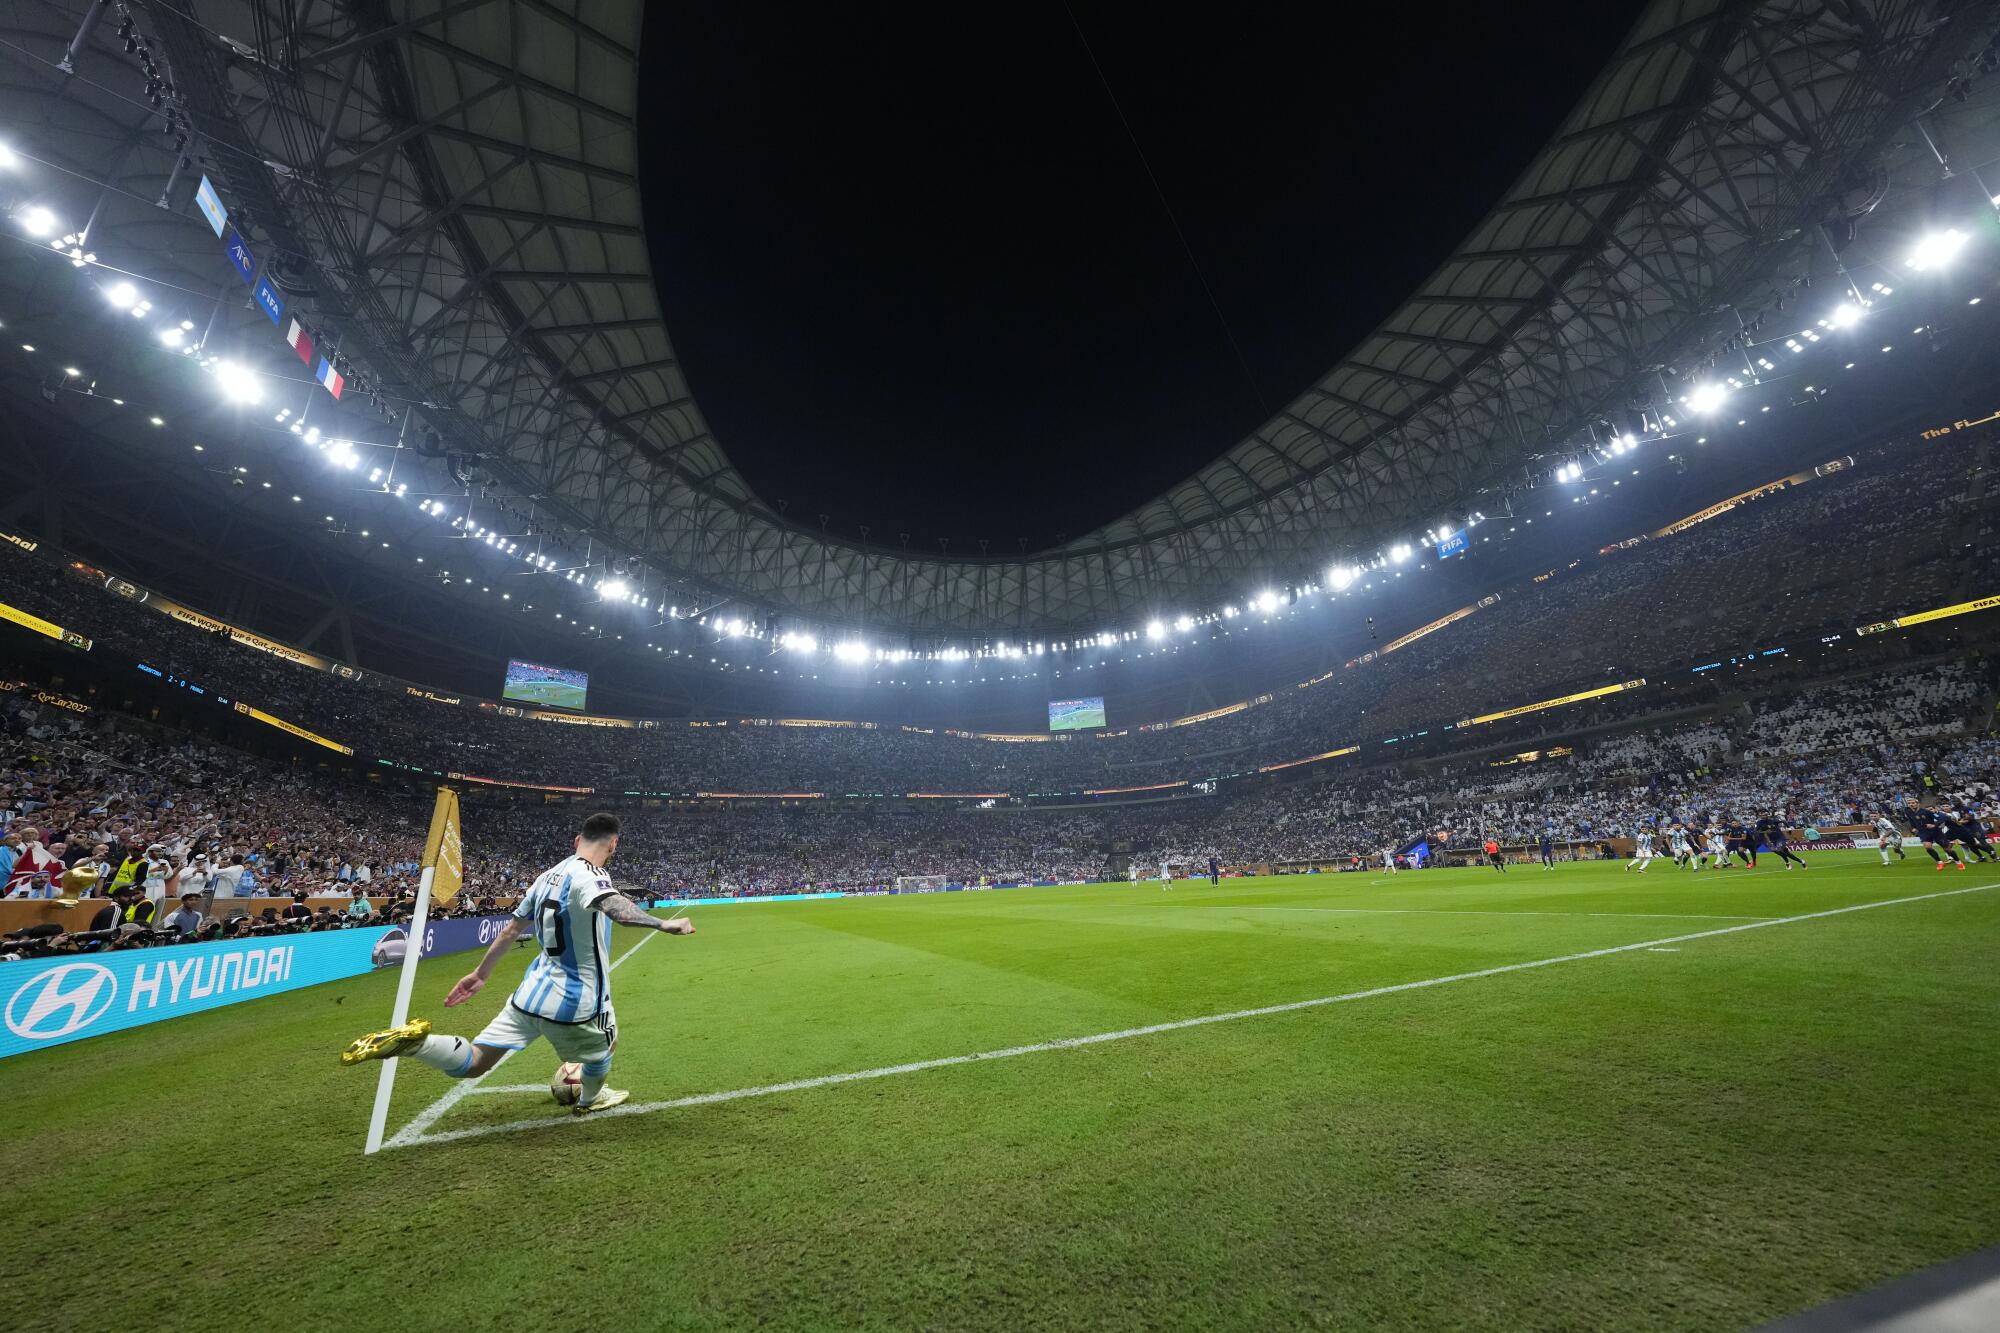 Argentina's Lionel Messi takes a corner kick during the World Cup final soccer match.